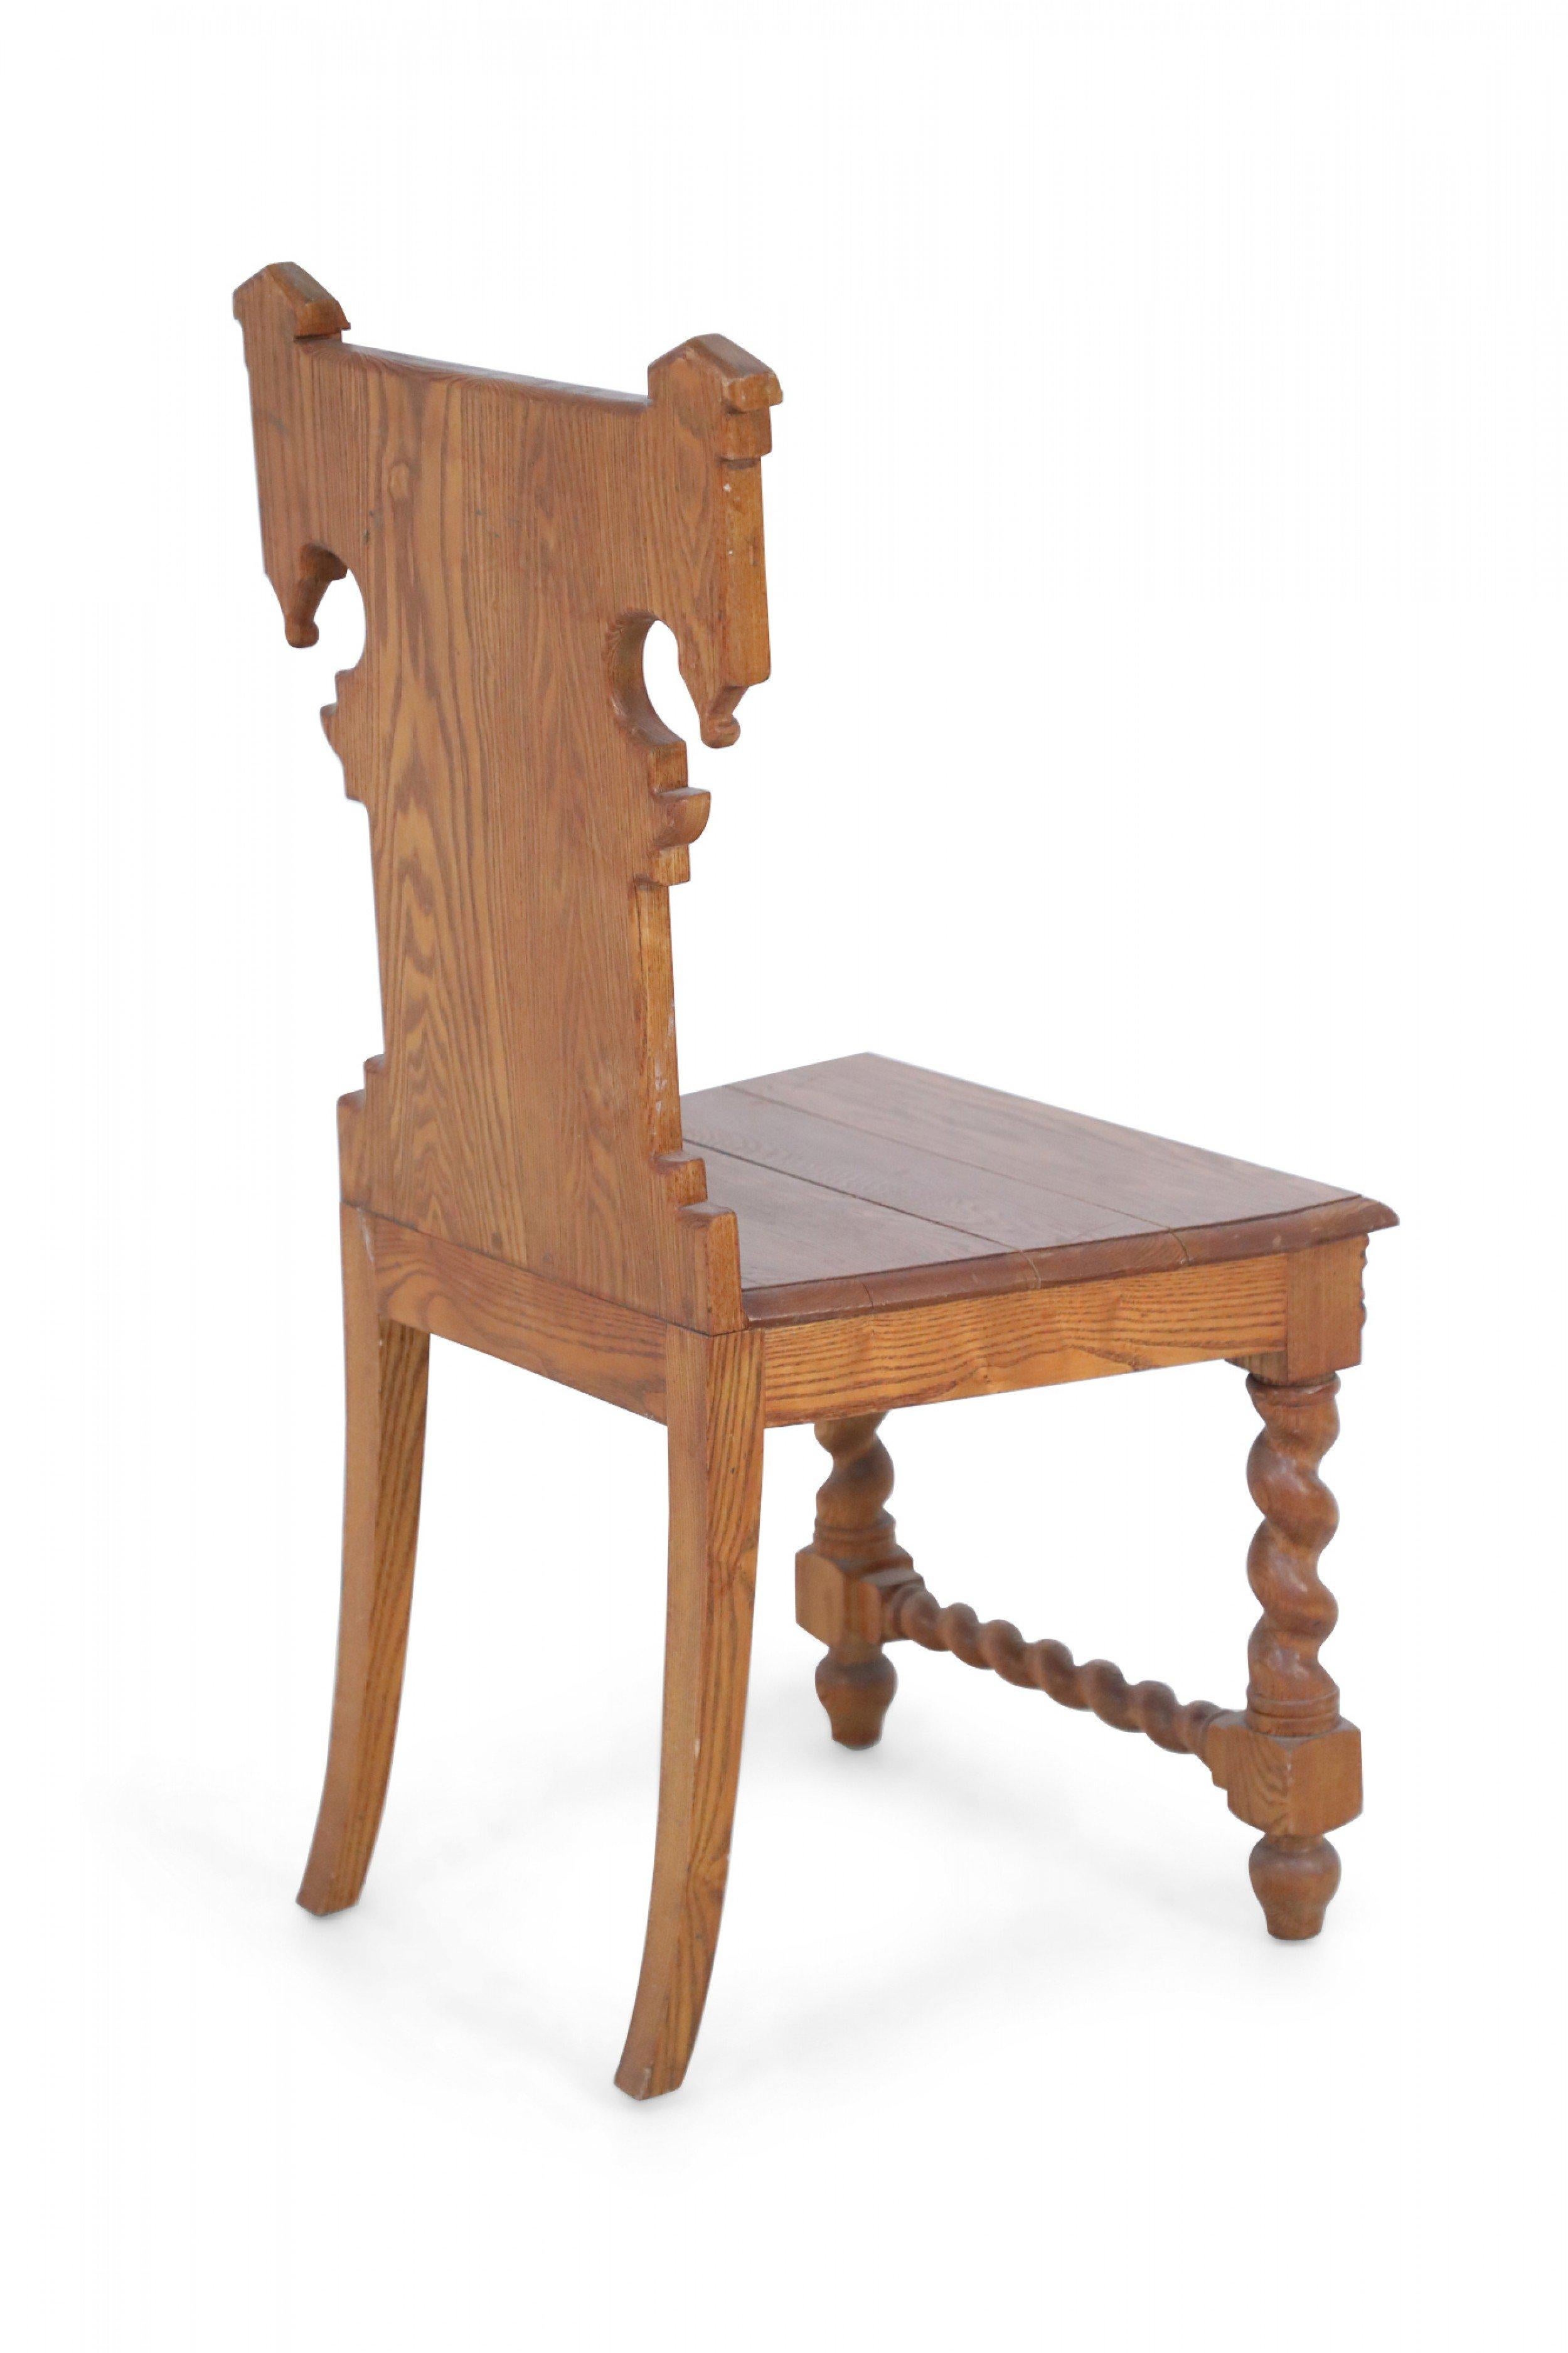 20th Century Italian Renaissance Carved Wooden Turn-Legged Side Chair For Sale